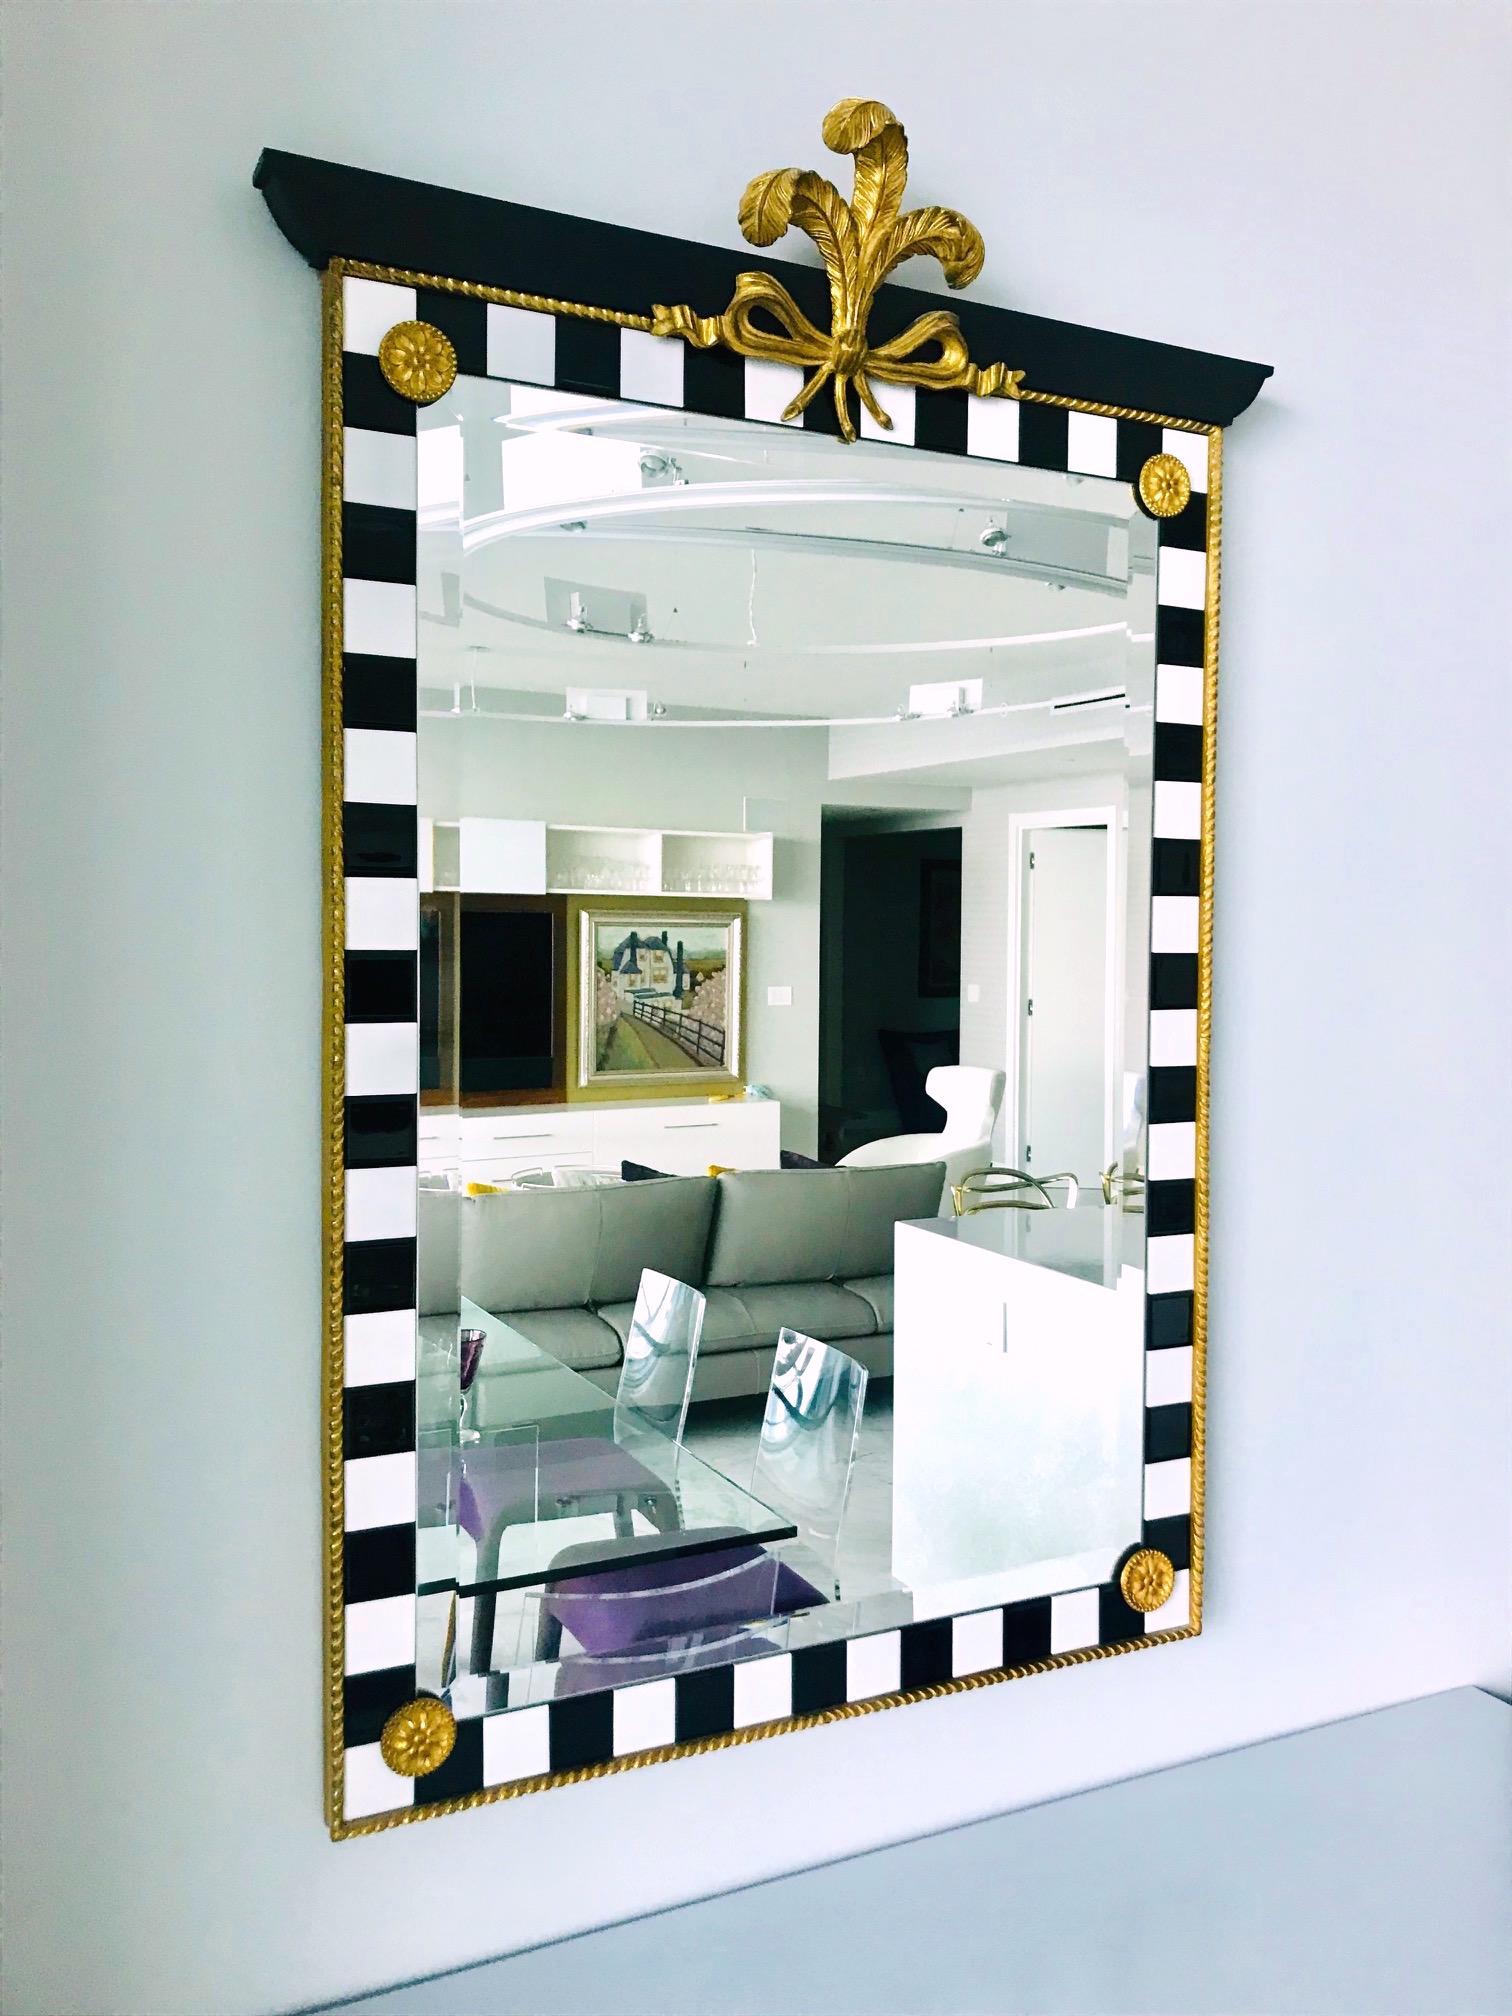 Late 20th Century Hollywood Regency Mirror with Gold Leaf Plumes and Ceramic Tiles